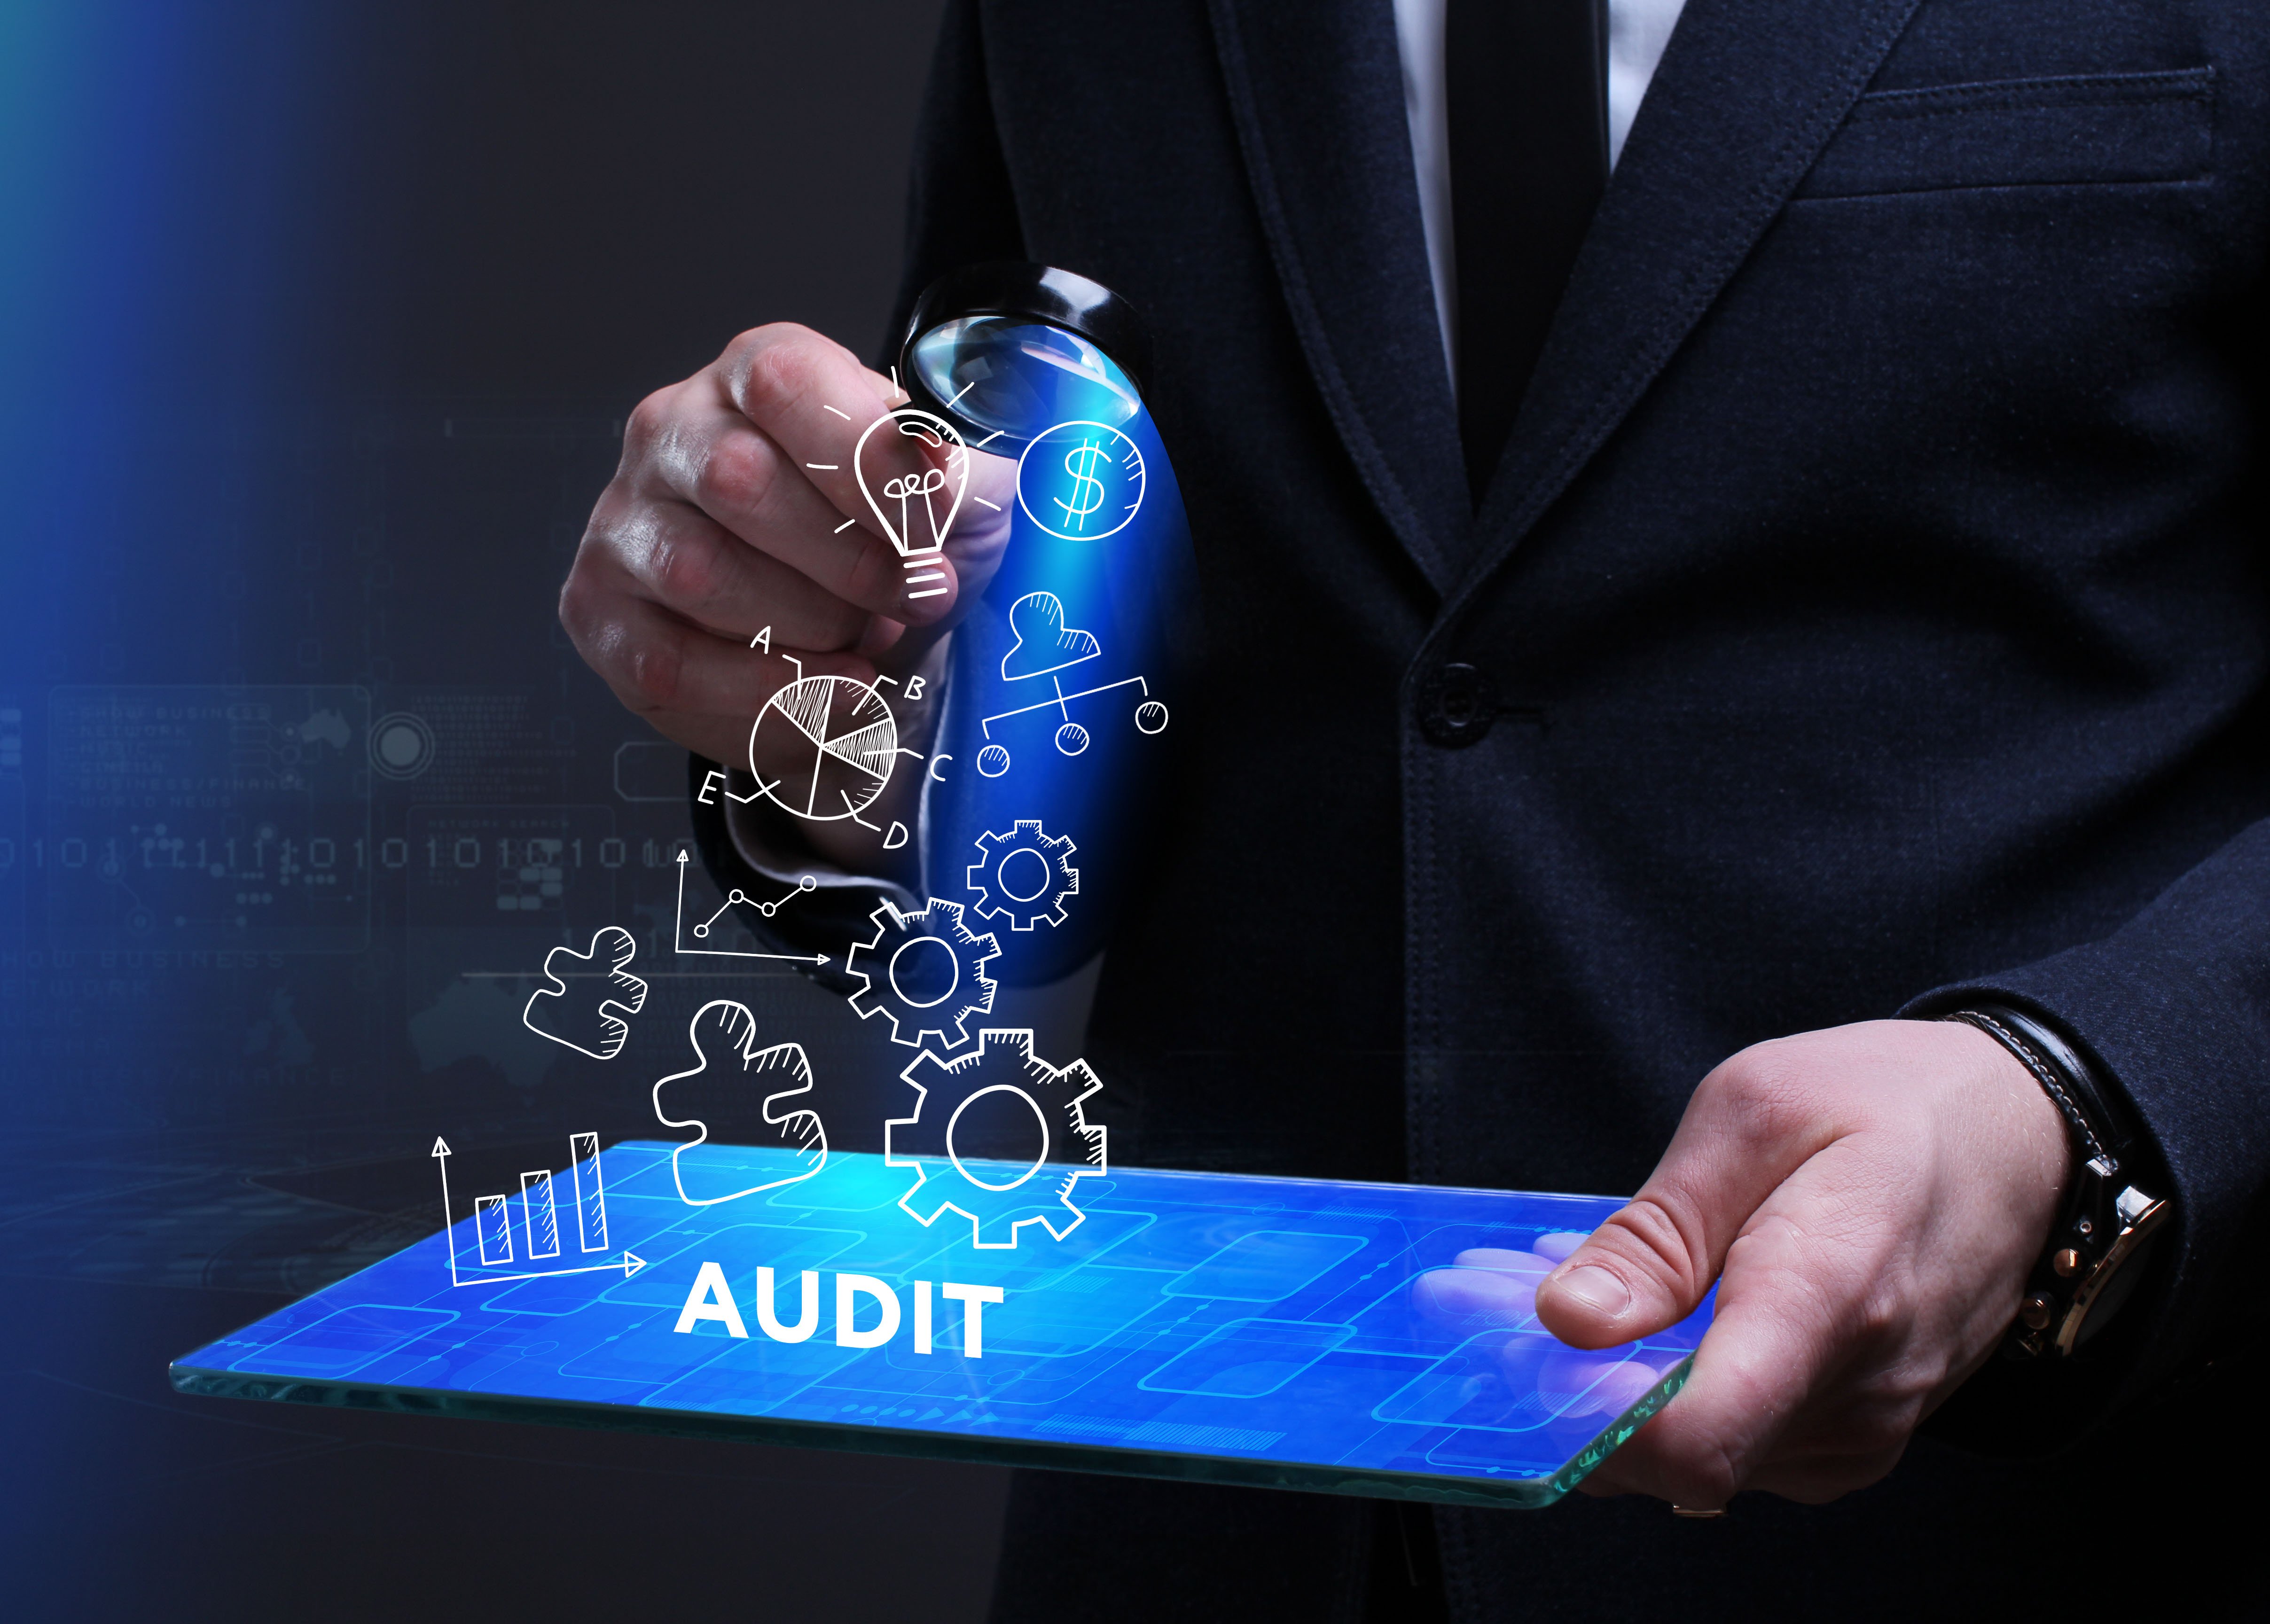 Security, GRC and Audits: Avoid the Findings